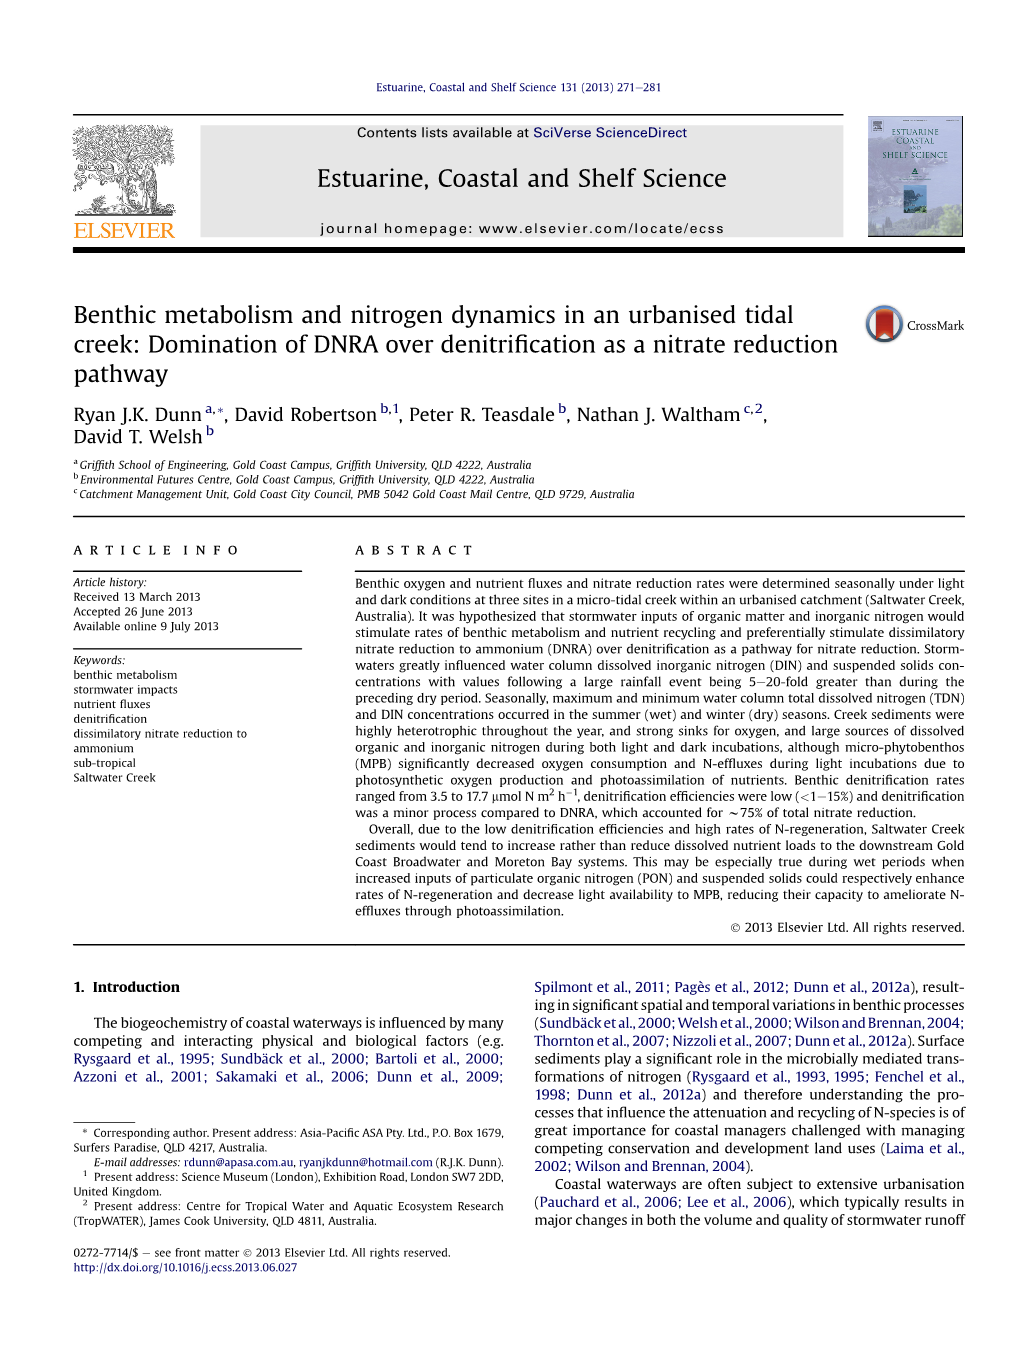 Benthic Metabolism and Nitrogen Dynamics in an Urbanised Tidal Creek: Domination of DNRA Over Denitriﬁcation As a Nitrate Reduction Pathway